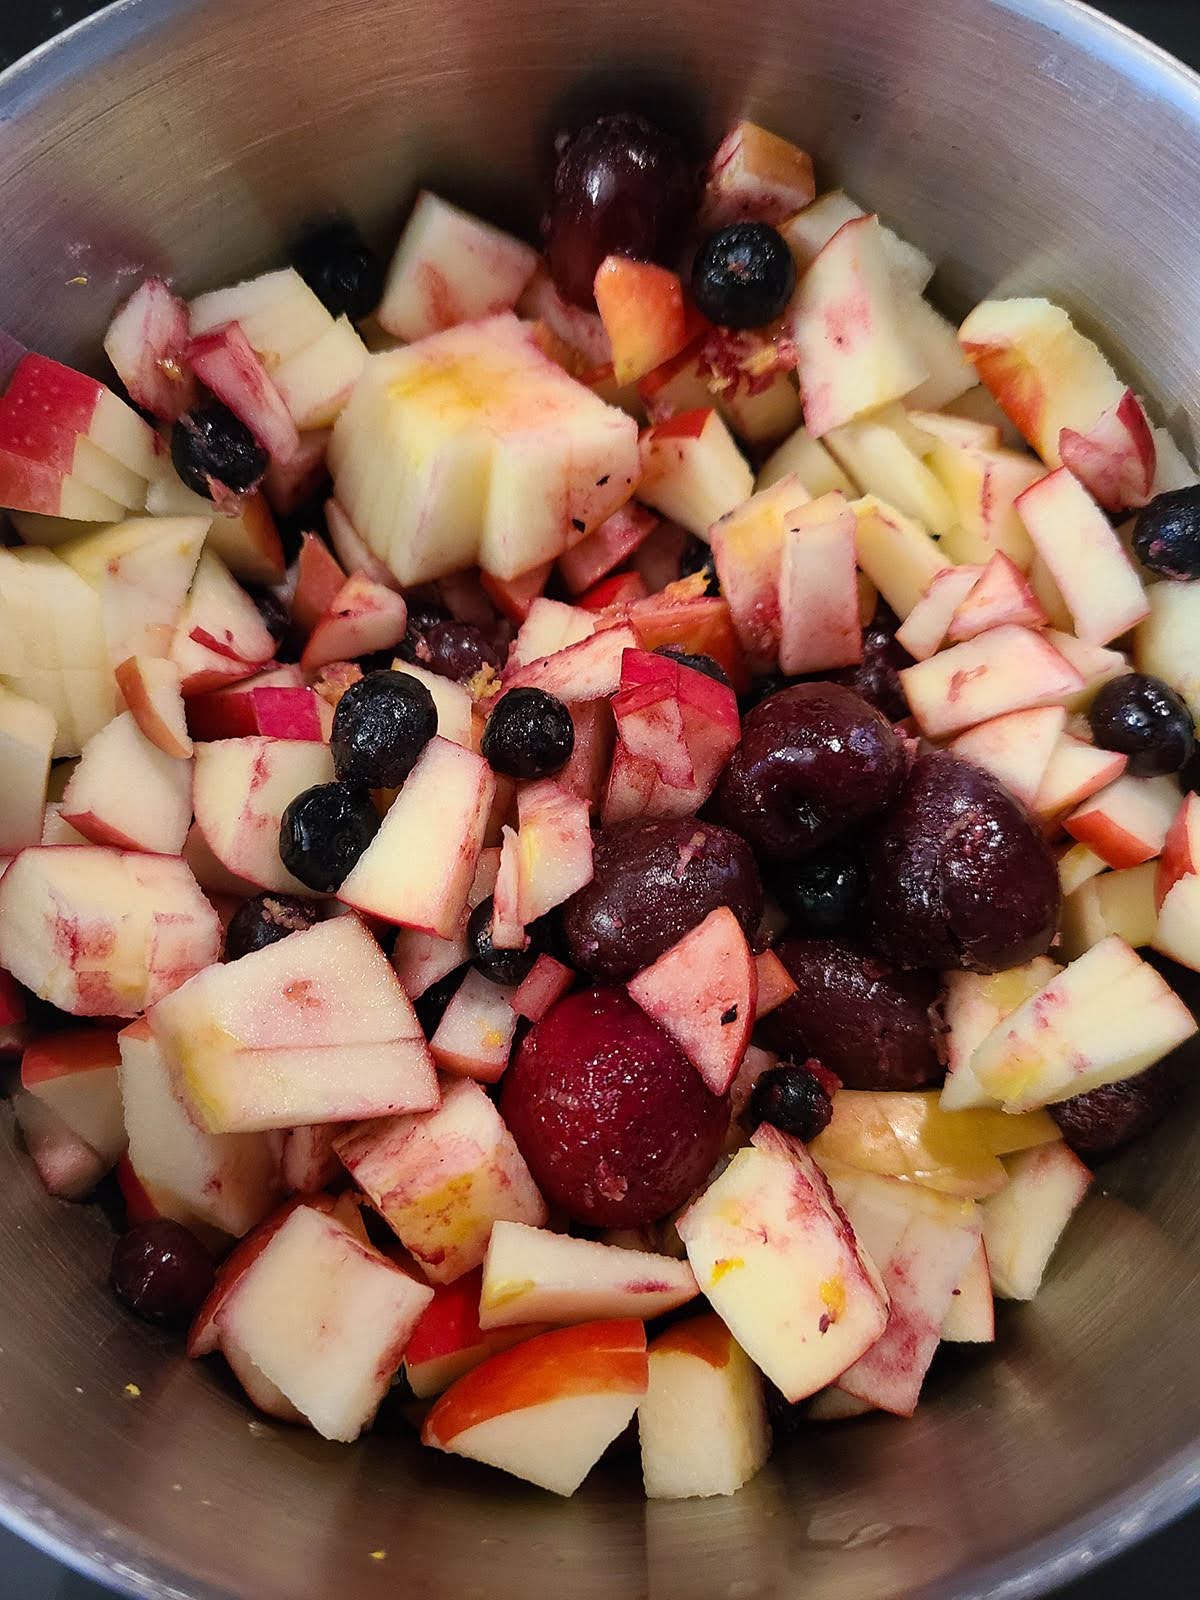 cut-up-apples-and-berries